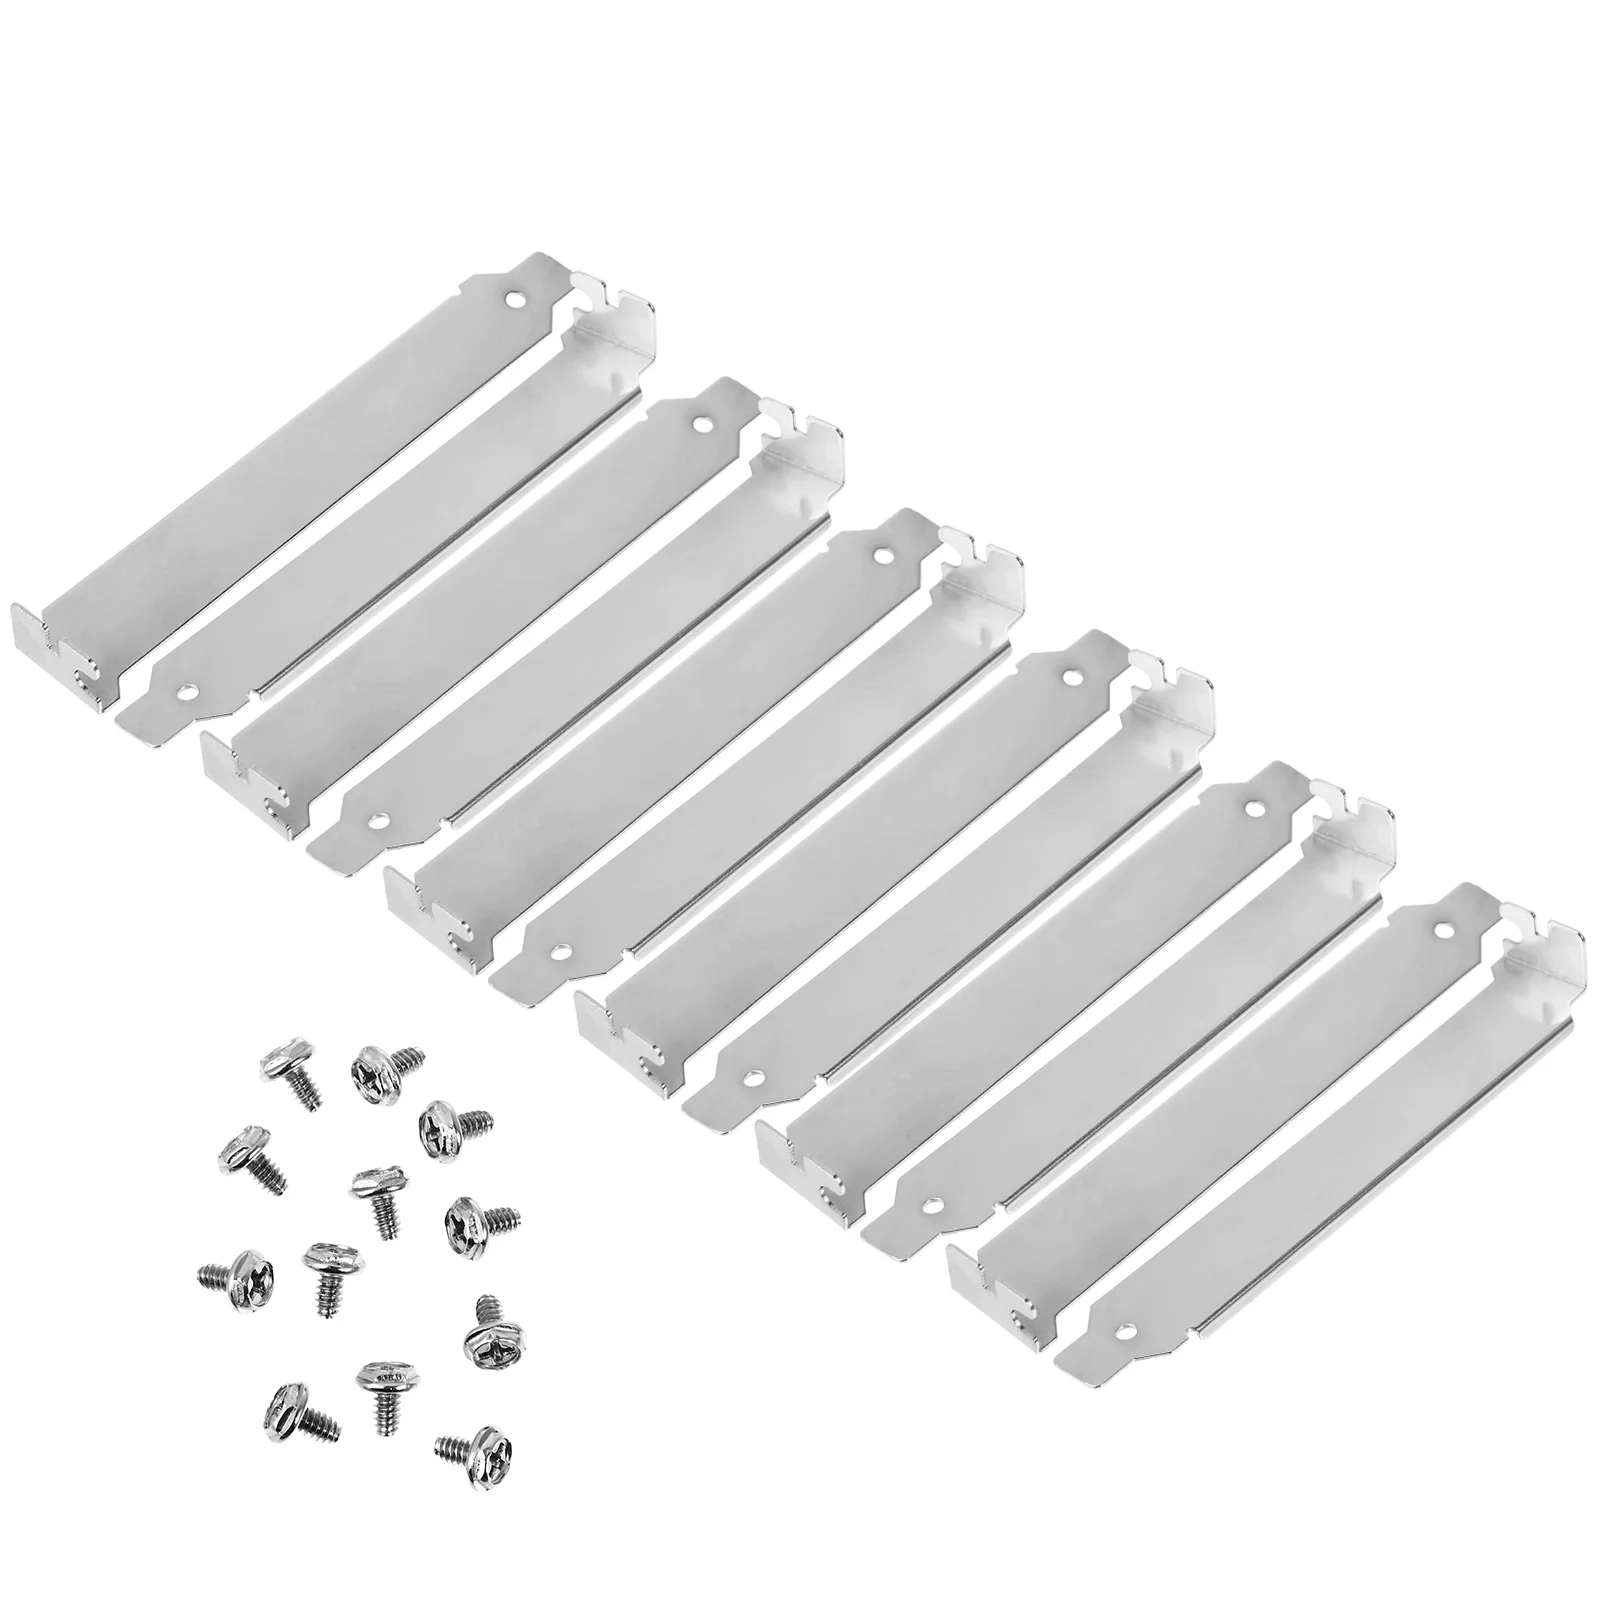 

12 Pcs Pci Slot Cover Computer Chassis Block Accessory Gpu Stand Blanking Plate Case Screws Bits Bracket